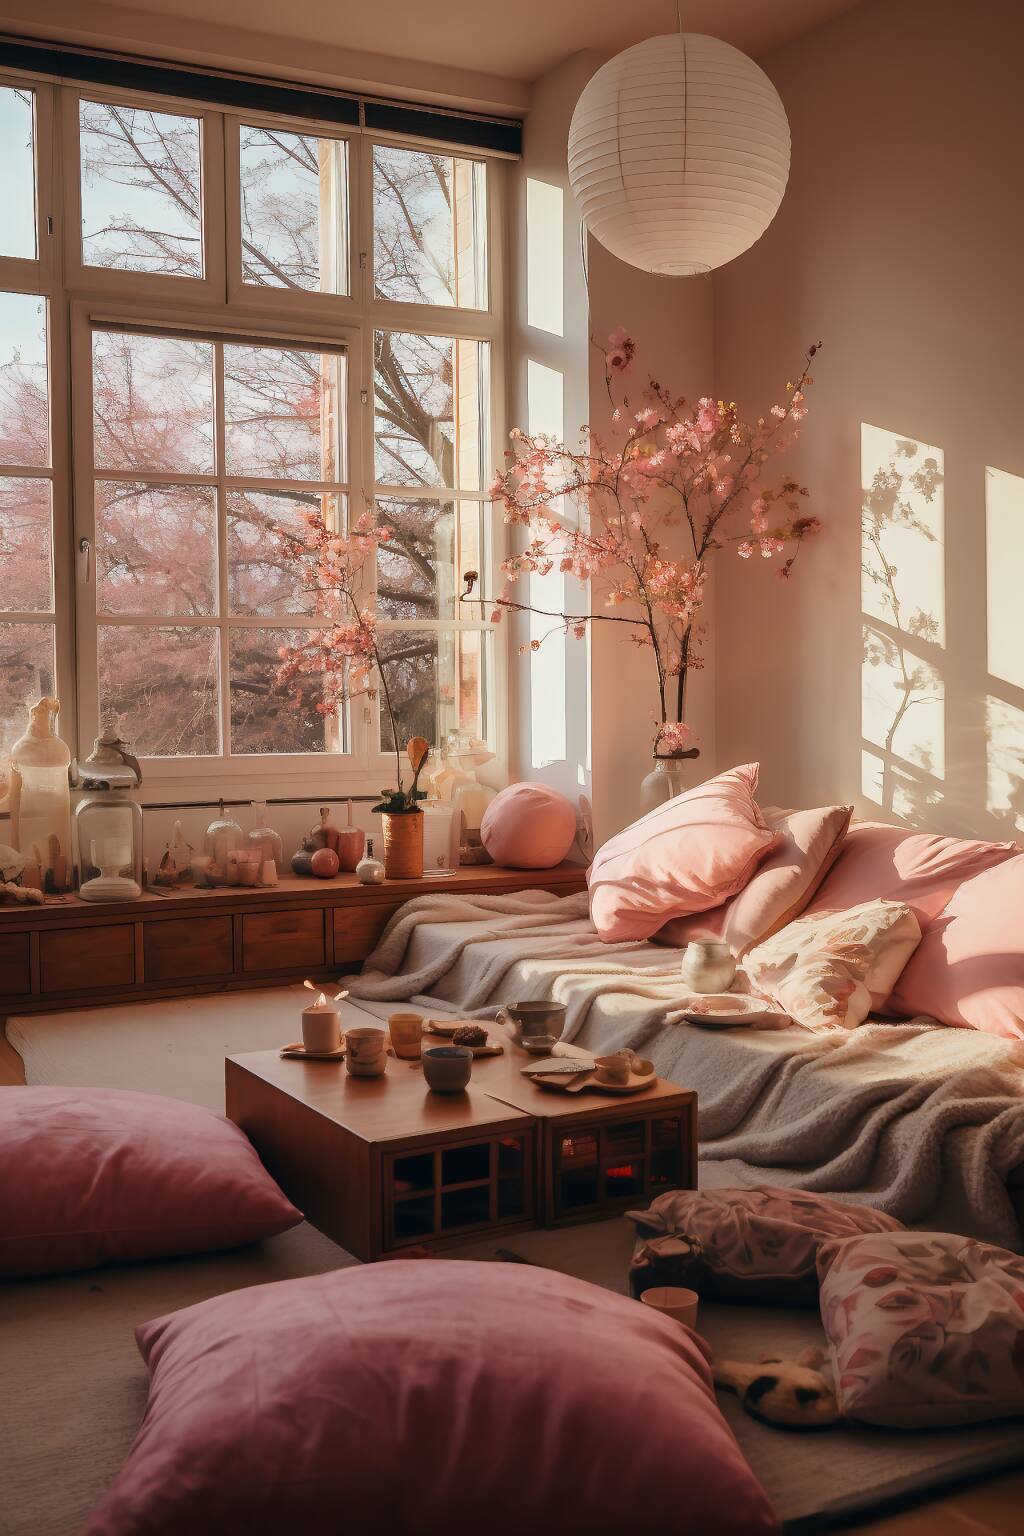 A Romantic And Serene Living Room With Low Seating, Pink Pillows, Cherry Blossoms, And A Warm, Sunlit Ambiance.